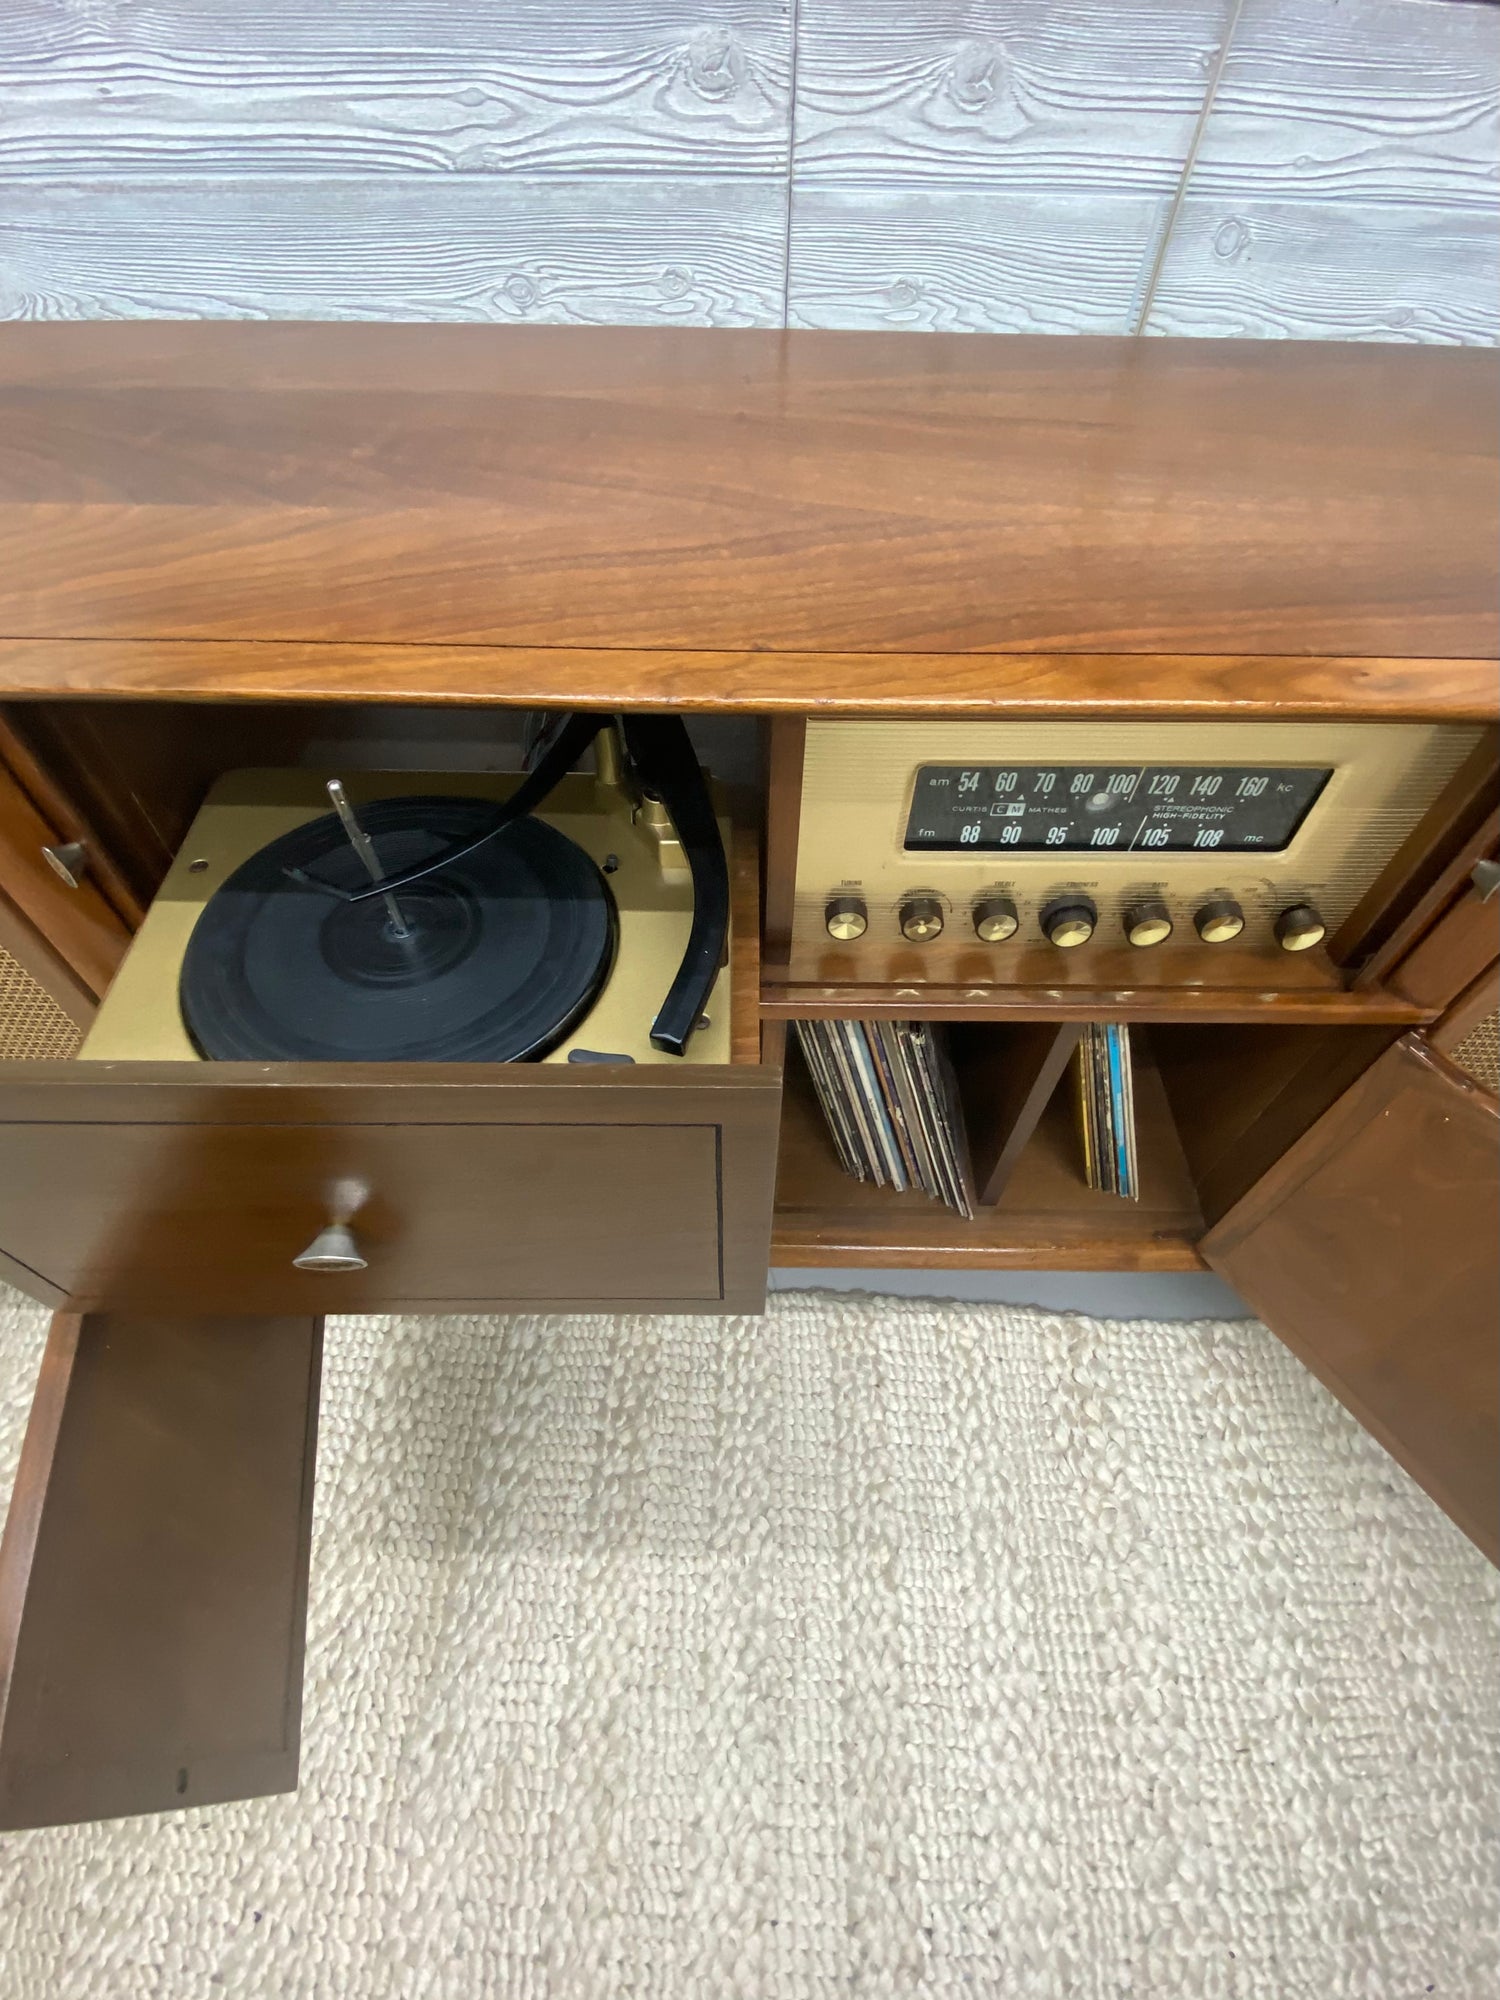 SOLD OUT!!! Curtis Mathes Mid Century Stereo Console Record Player Changer - AM FM Bluetooth The Vintedge Co.